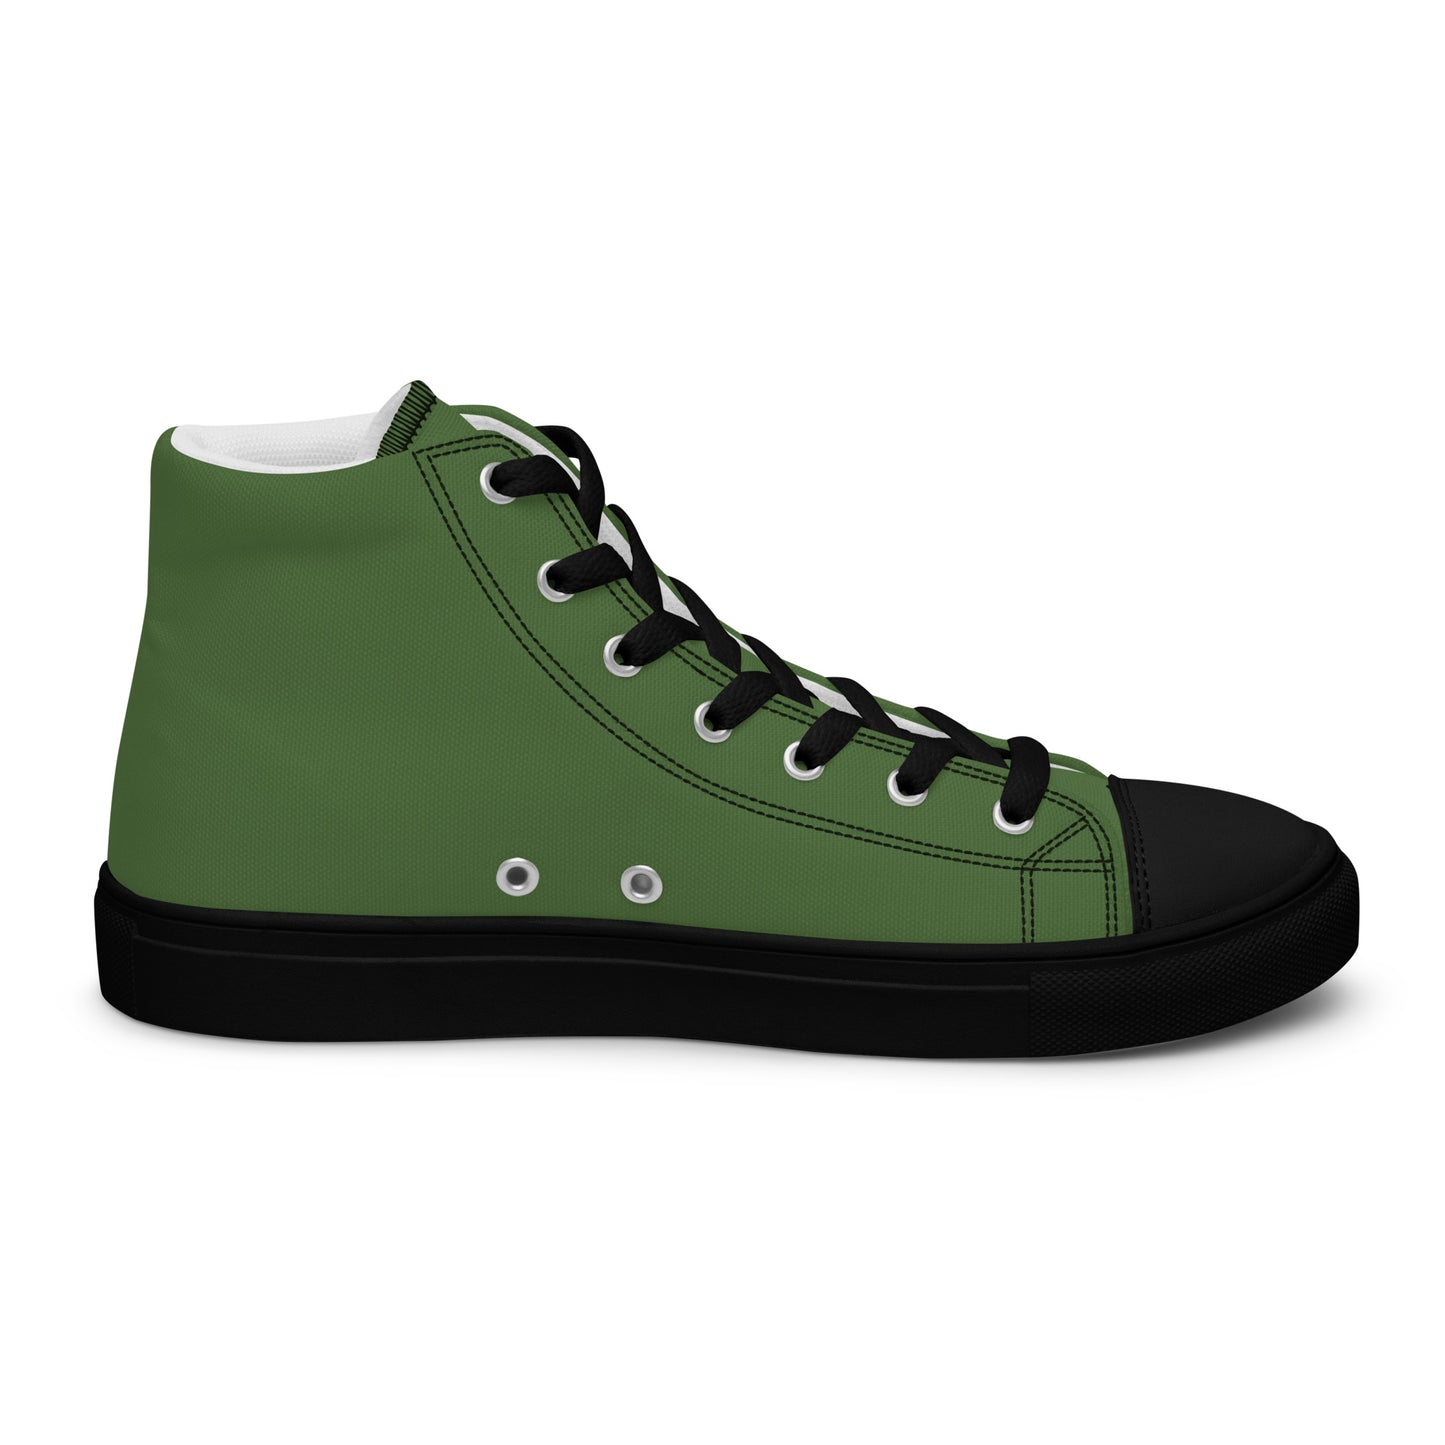 Perilous Crossing High Top Canvas Shoes